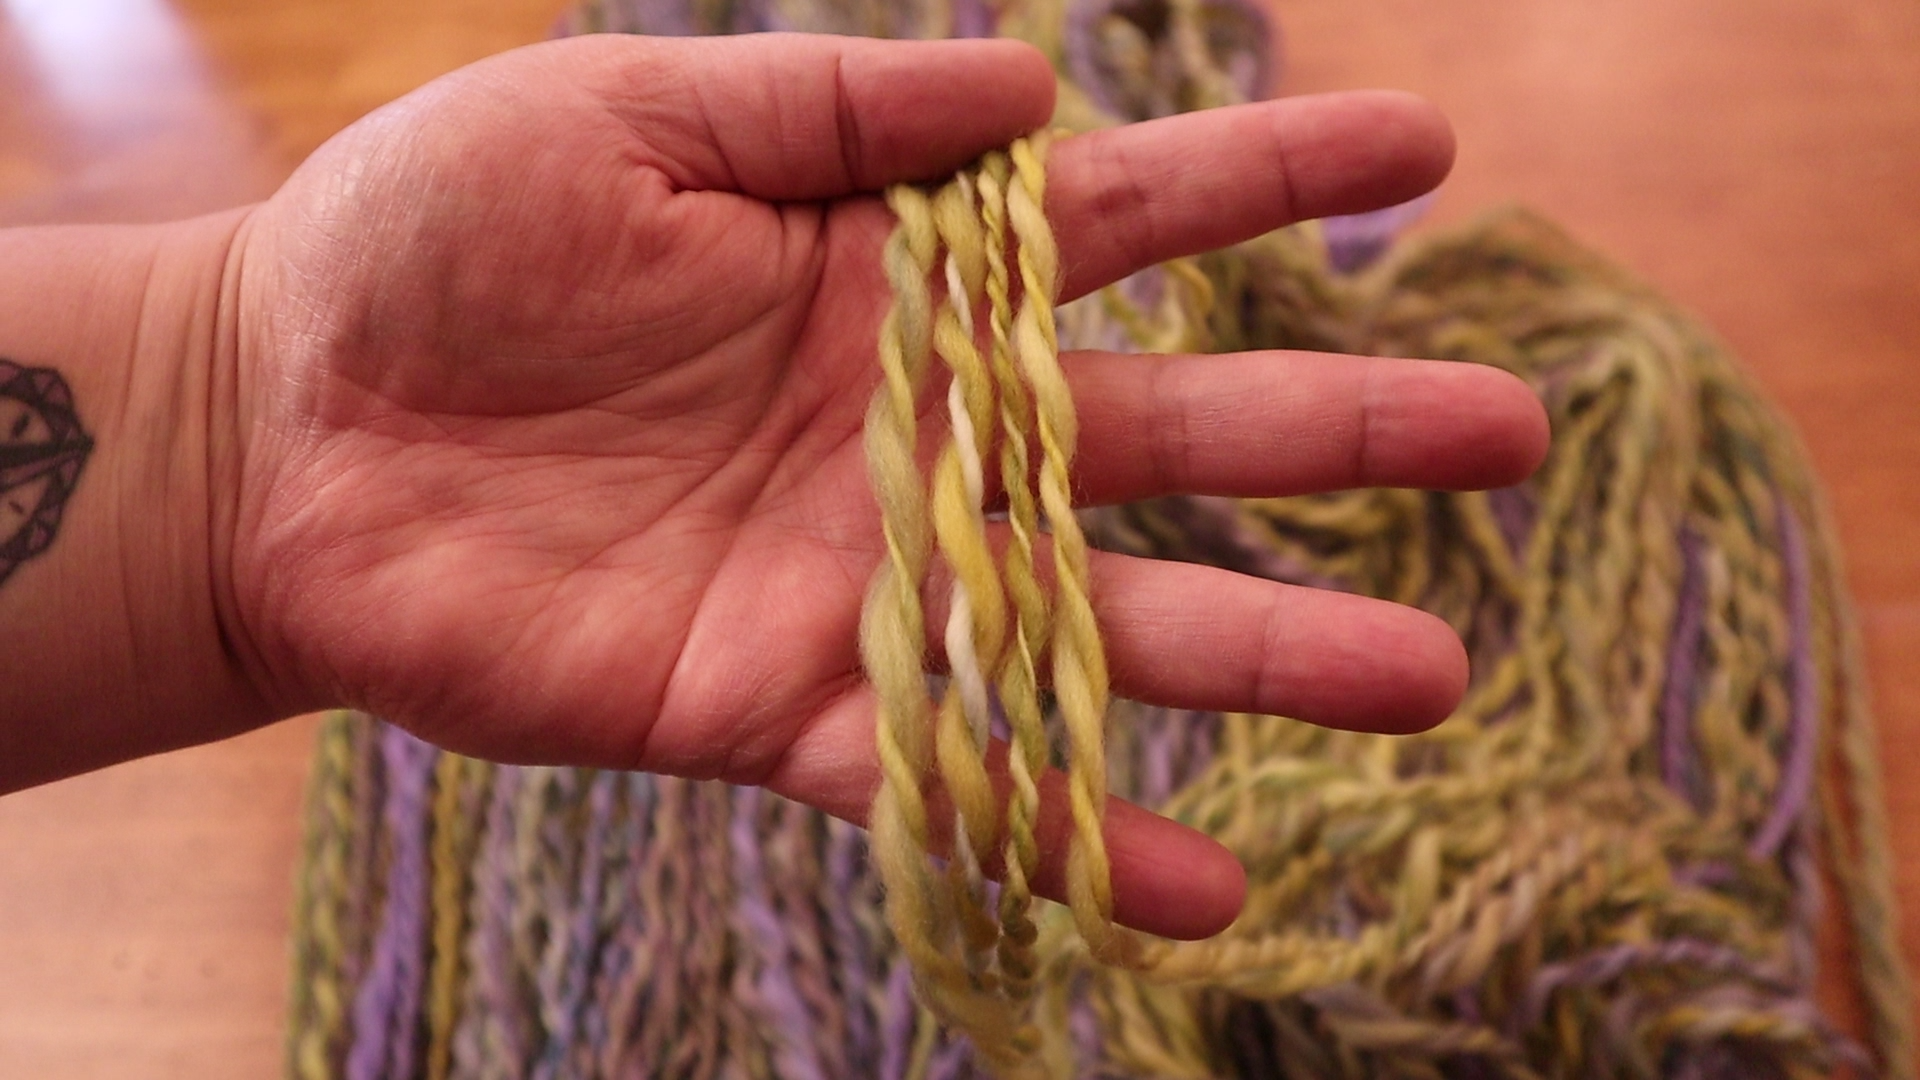 Does plying from a center pull ball change your twist? — A yarn spinning experiment!